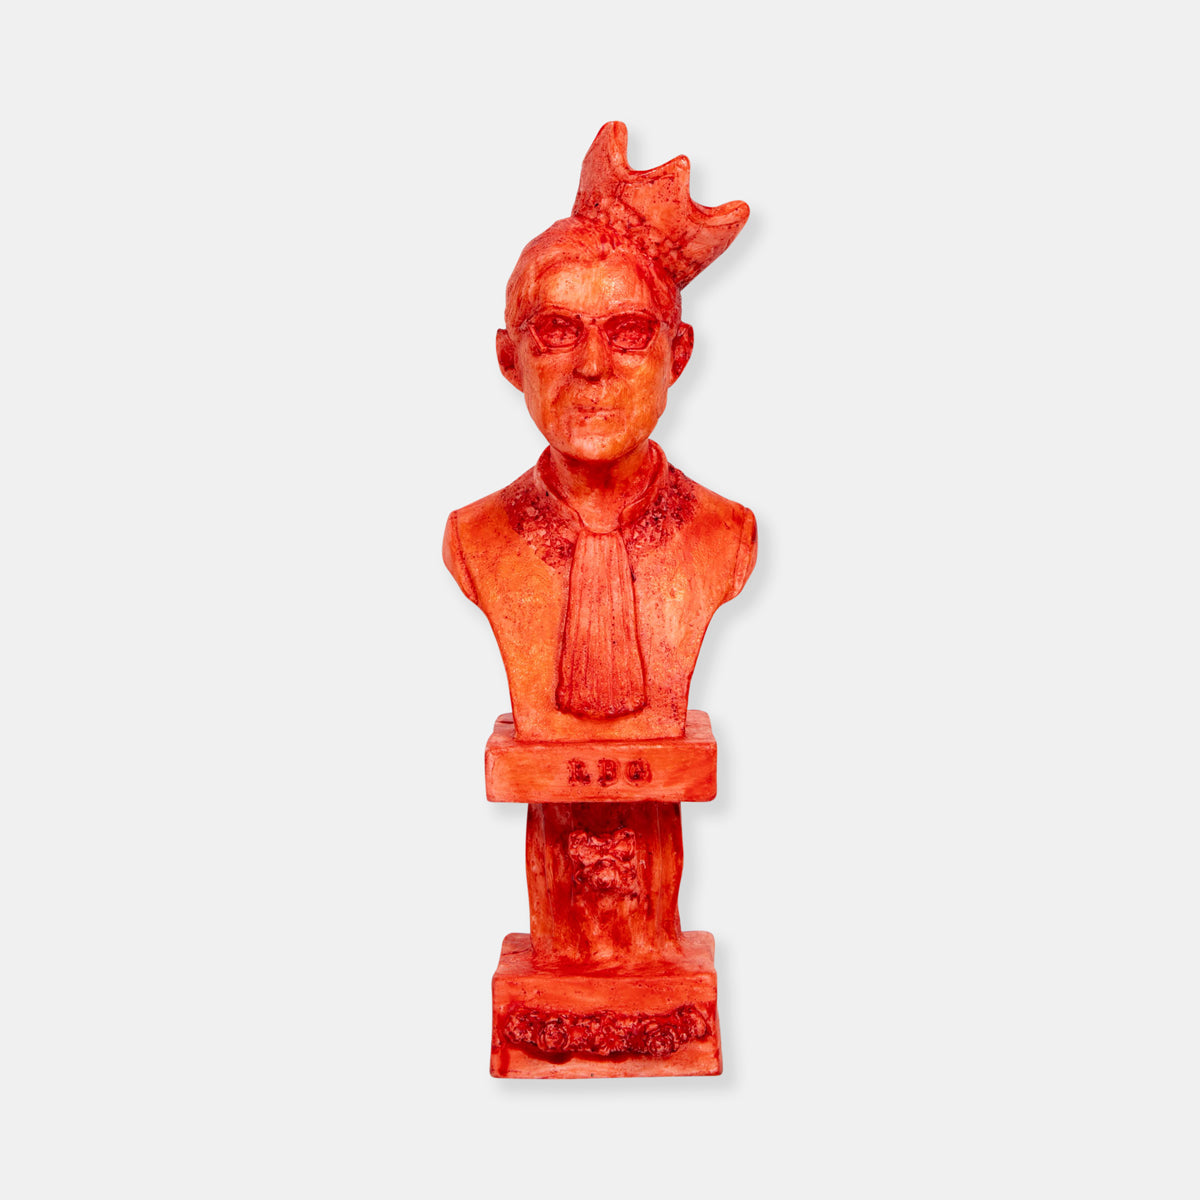 Artsuite - Tim Tate - RBG - Red - Sculpture - 12" tall - Ruth Bader Ginsburg has always been one of Tate's heroes and he considers her as the conscious of our nation. When he read her final wish, it broke his heart and he reacted as any artist would - he created art to honor her and her guardianship of the moral integrity of the country.